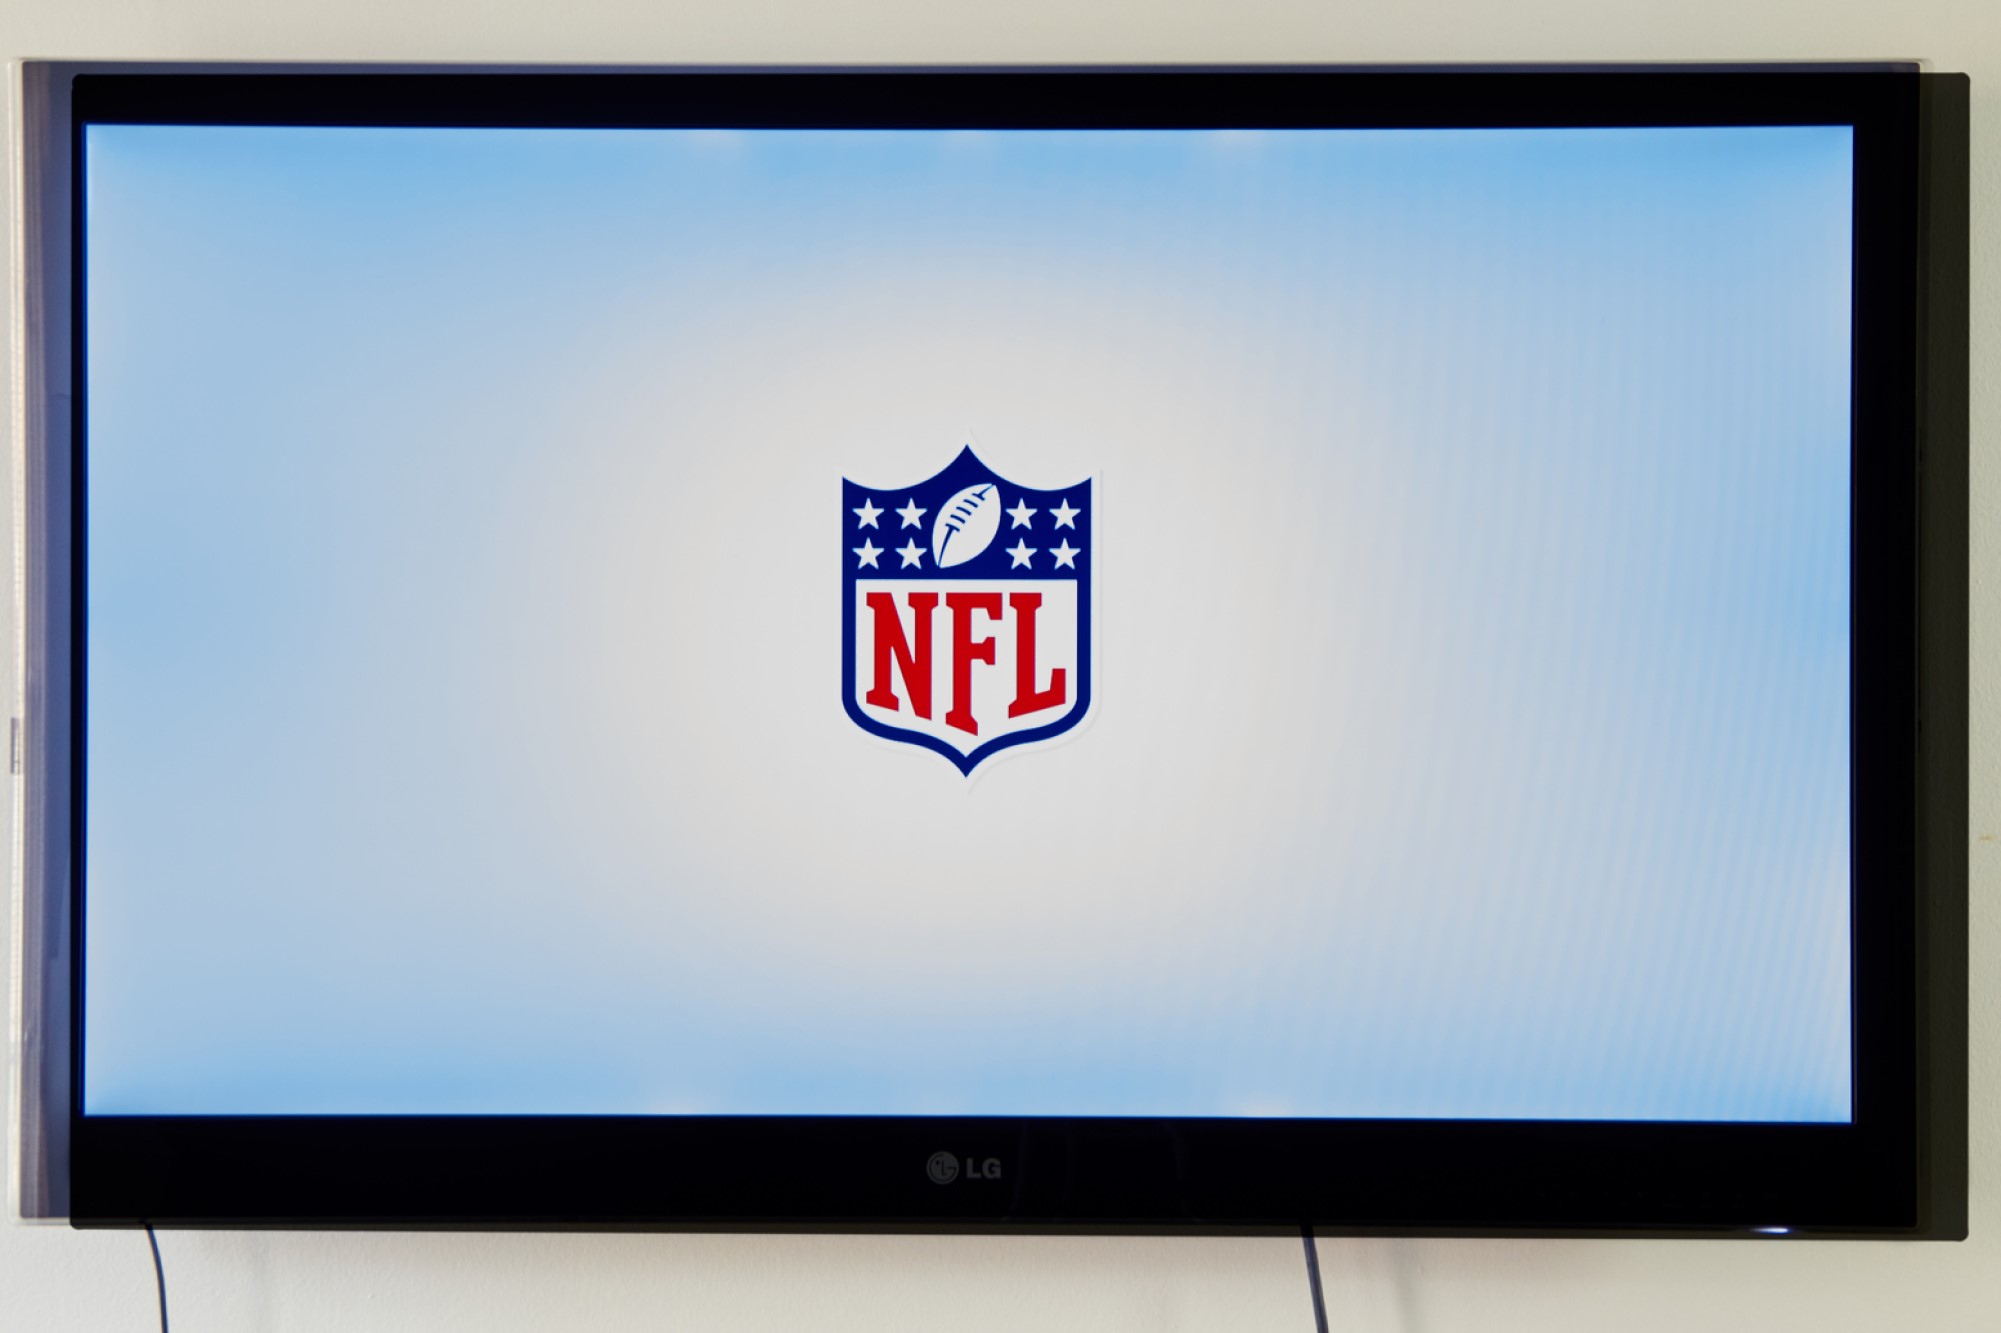 photograph of NFL logo on TV screen